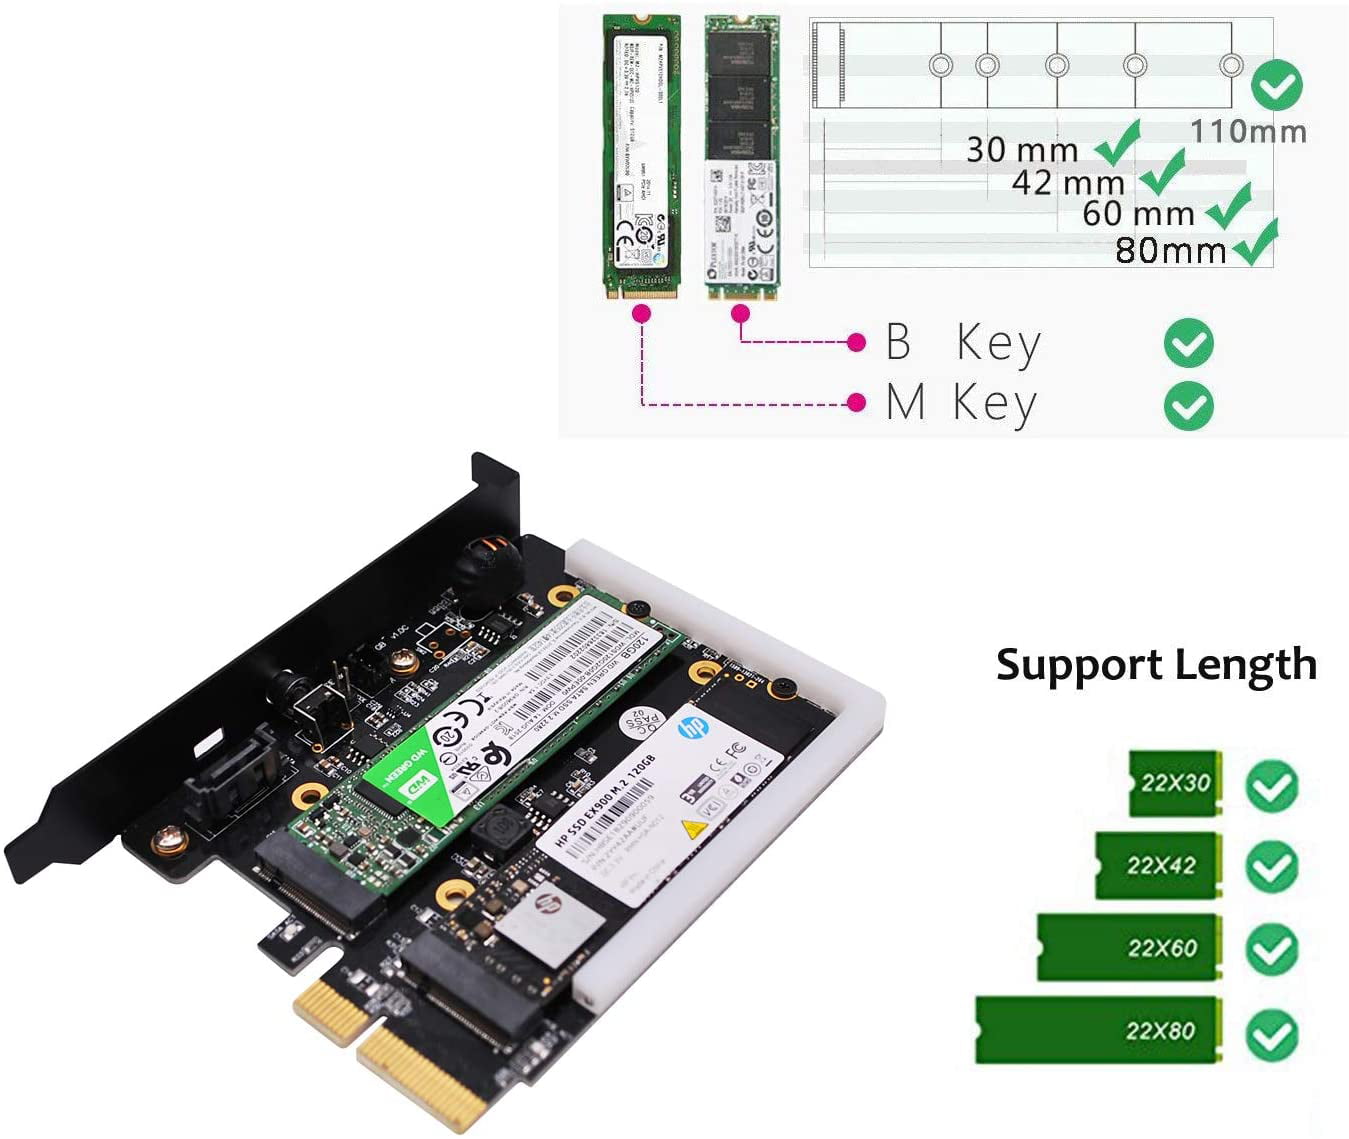 M.2 PCIe NVMe and PCIe AHCI SSD to PCIe 3.0 x4 and M.2 SATA SSD to SATA III Adapter Card EZDIY-FAB Dual M.2 Adapter 